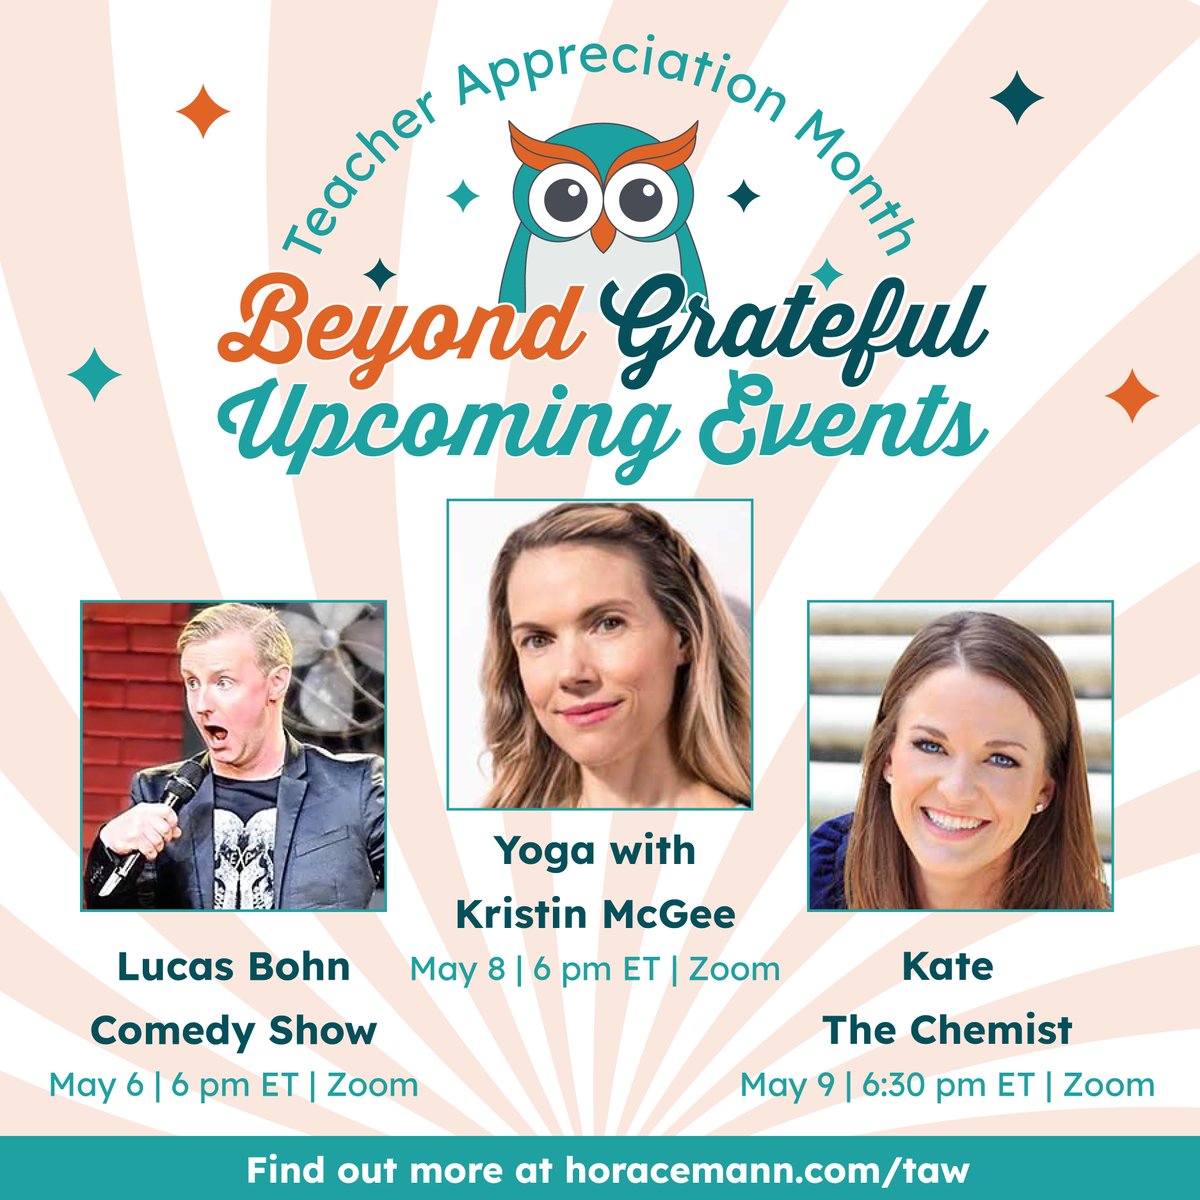 Get ready to relax with Kristin McGee, laugh with Lucas Bohn and explore your curiosity with Kate the Chemist! These virtual events are FREE and will leave you with an unforgettable experience! Learn more and register to attend here: ow.ly/Vgsn50Rnu8o #HMBeyondGrateful